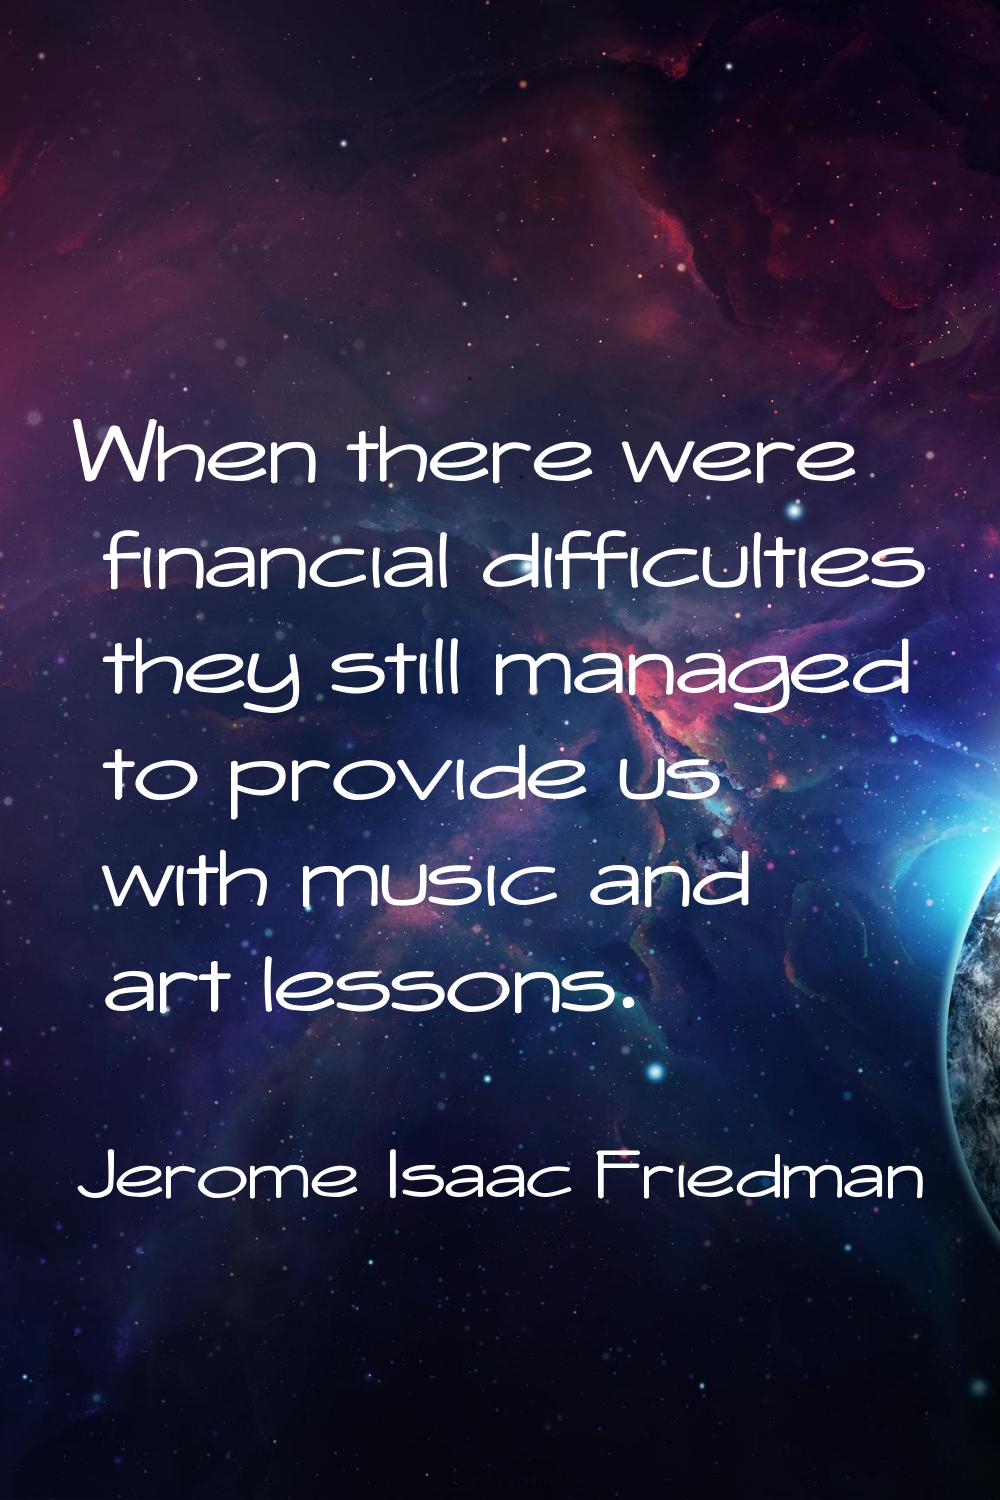 When there were financial difficulties they still managed to provide us with music and art lessons.